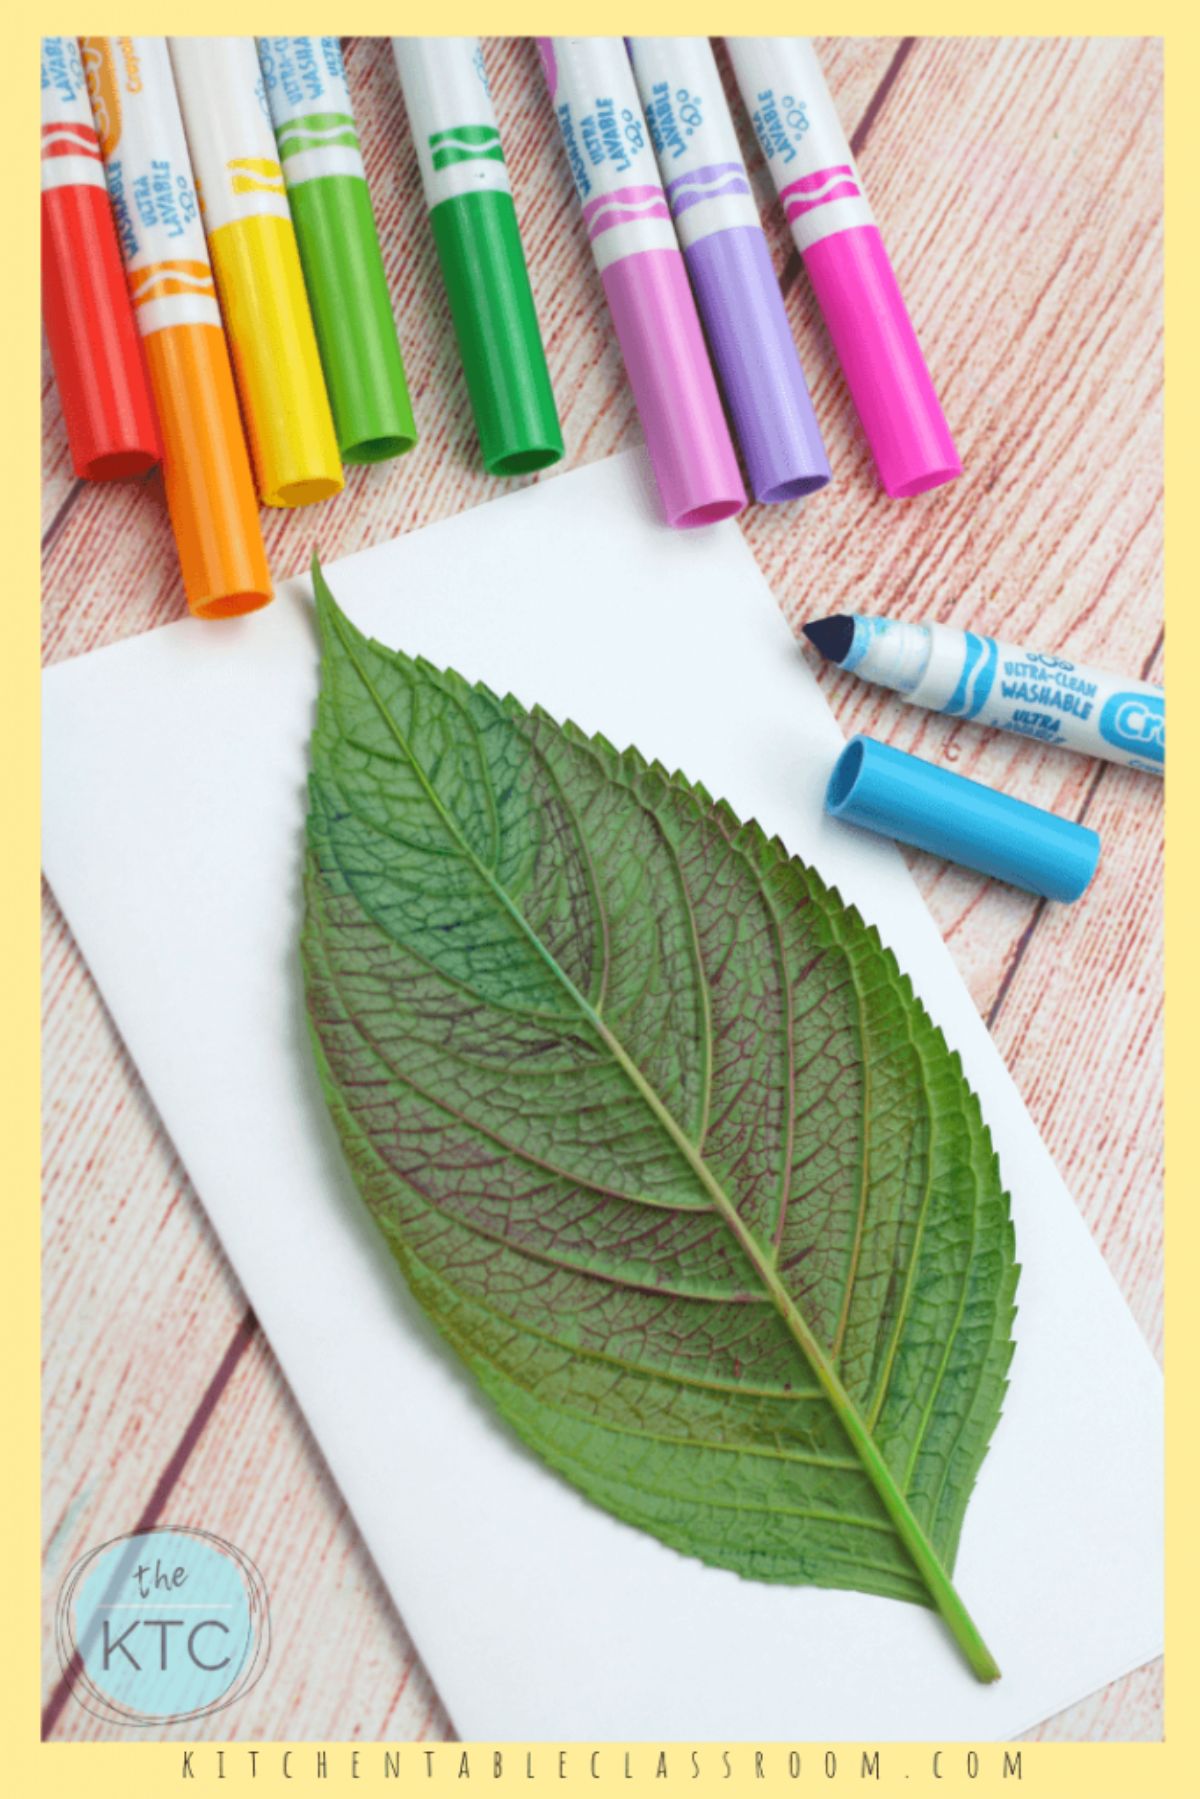 a leaf is aid out on a white sheet of paper. Above it you can see different colored felt tip pens